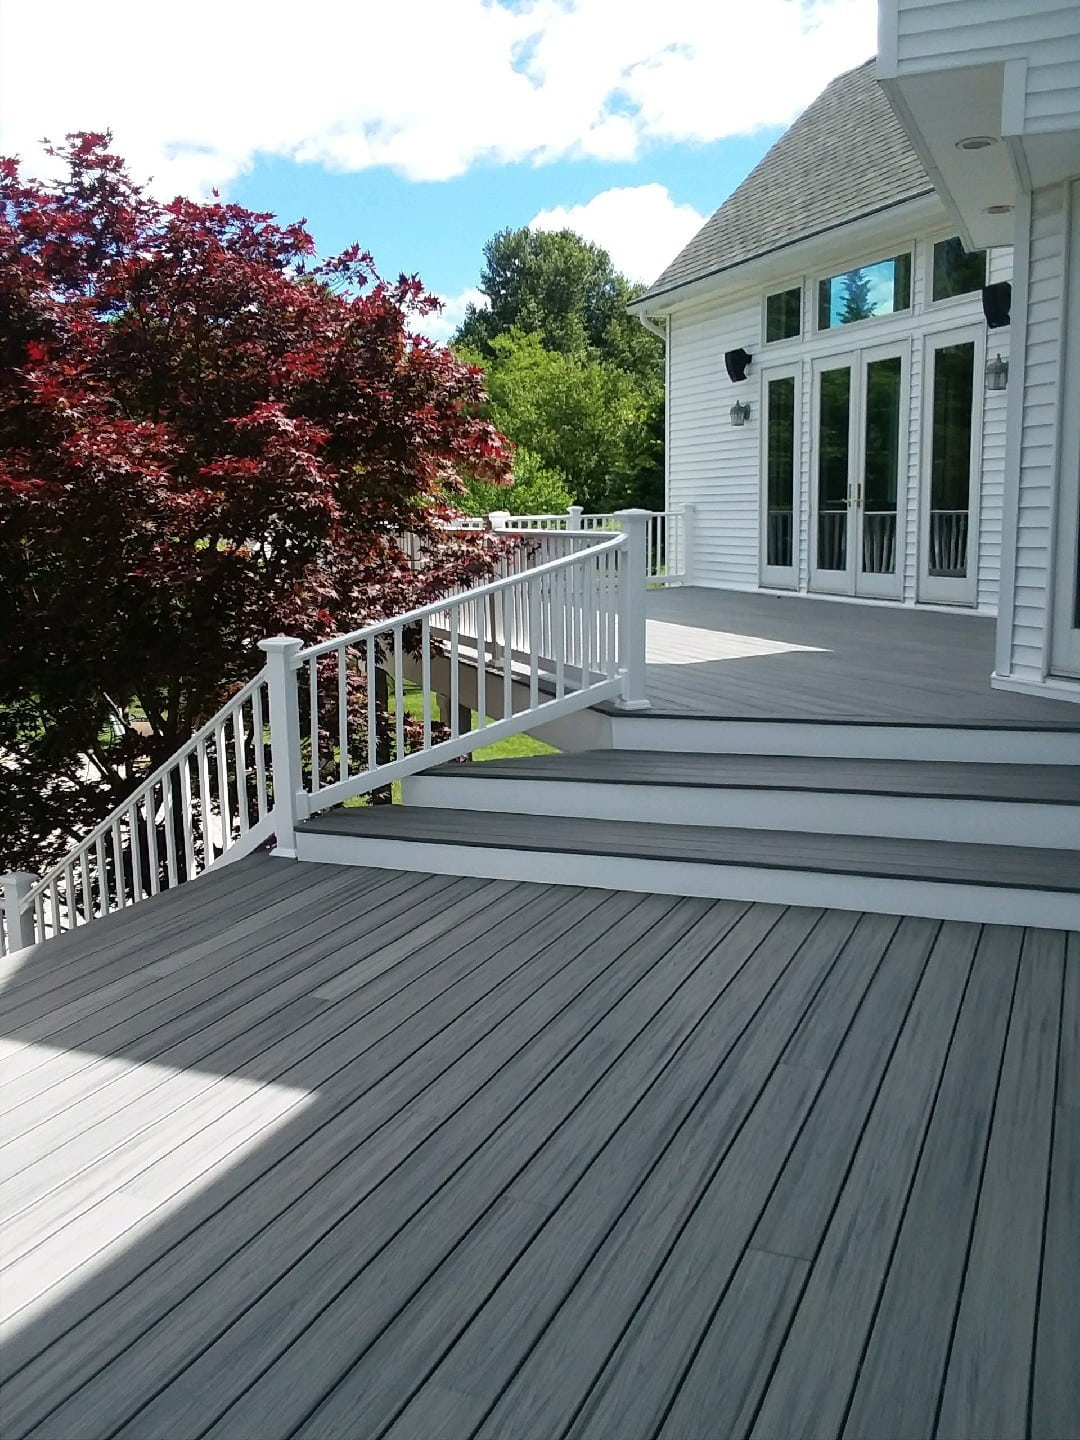 Trex Transcend Deck In Island Mist With White Pvc Railings In Long pertaining to dimensions 1080 X 1440